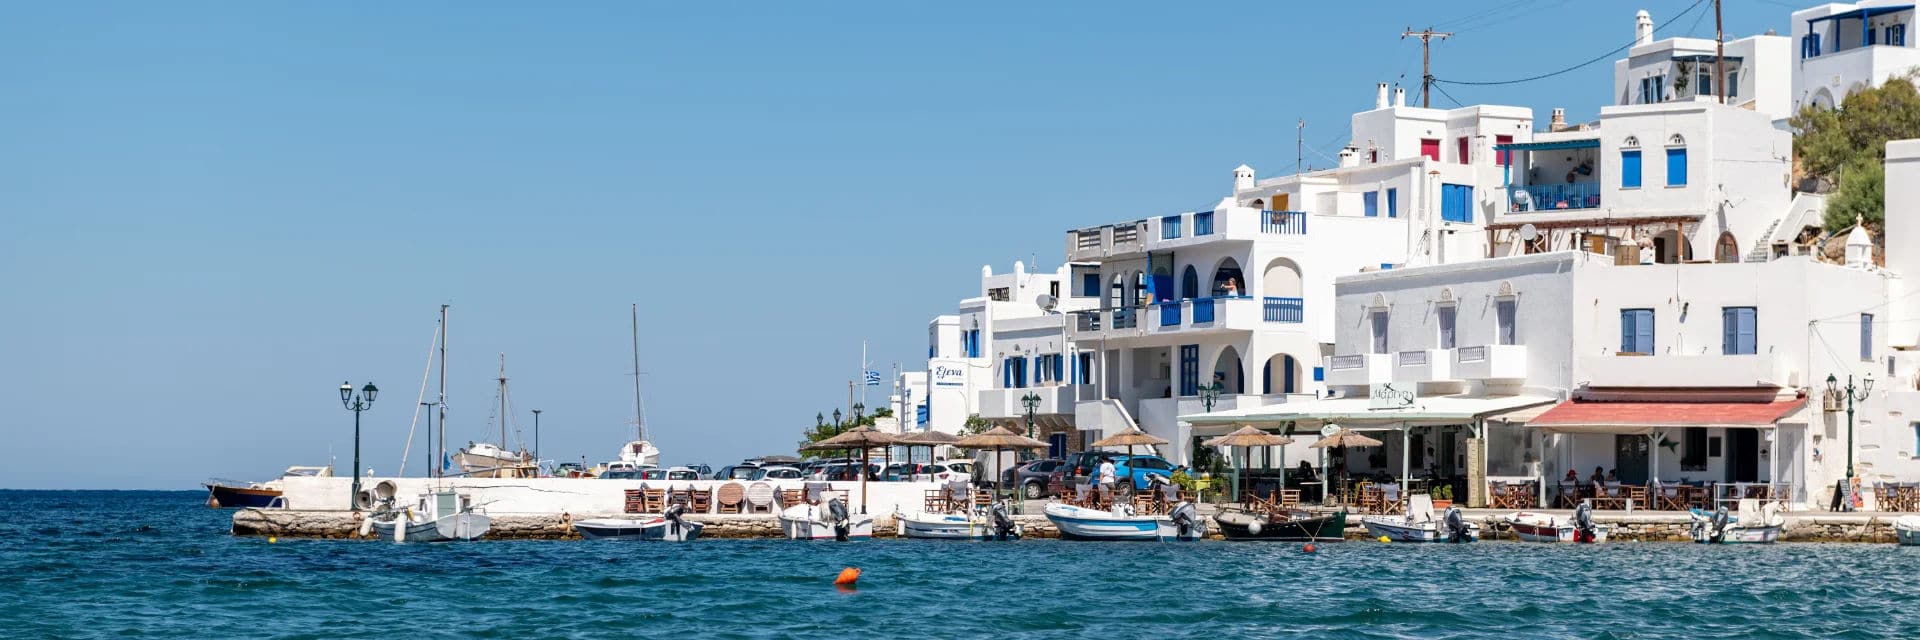 A scenic seaside view captures whitewashed buildings with blue accents along a waterfront. Several boats are moored at the dock, and a few outdoor cafes or restaurants line the shore, with patrons seated under umbrellas. The sky is clear and blue.

.